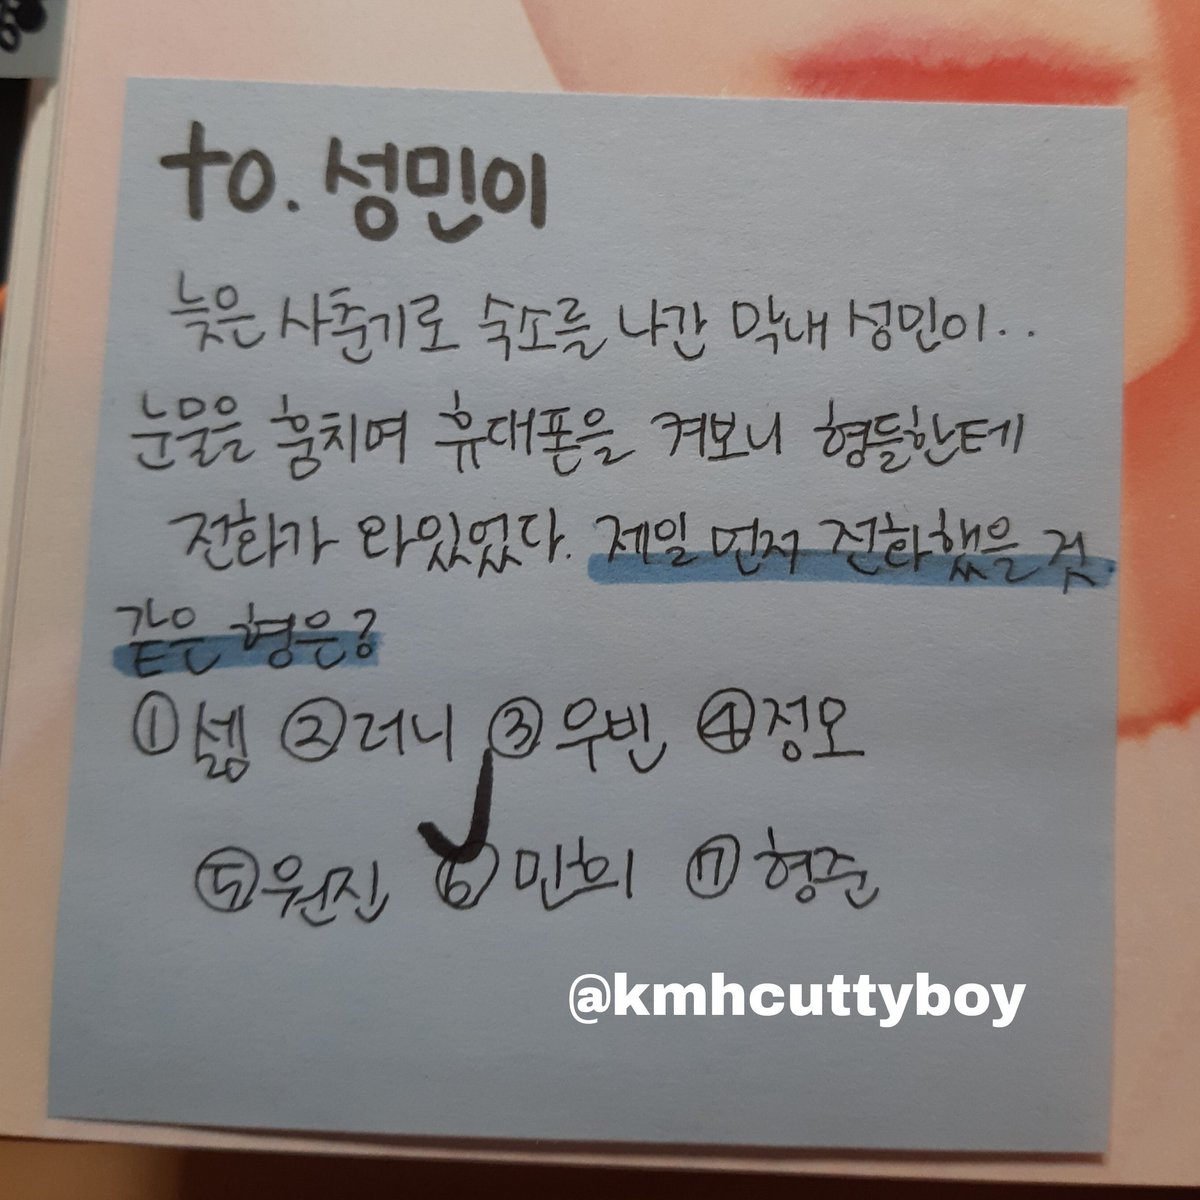 more minijeu T___Tseongmin's one pick hyung: minheethe hyung seongmin thinks would call first if he went out late due to puberty: minhee 